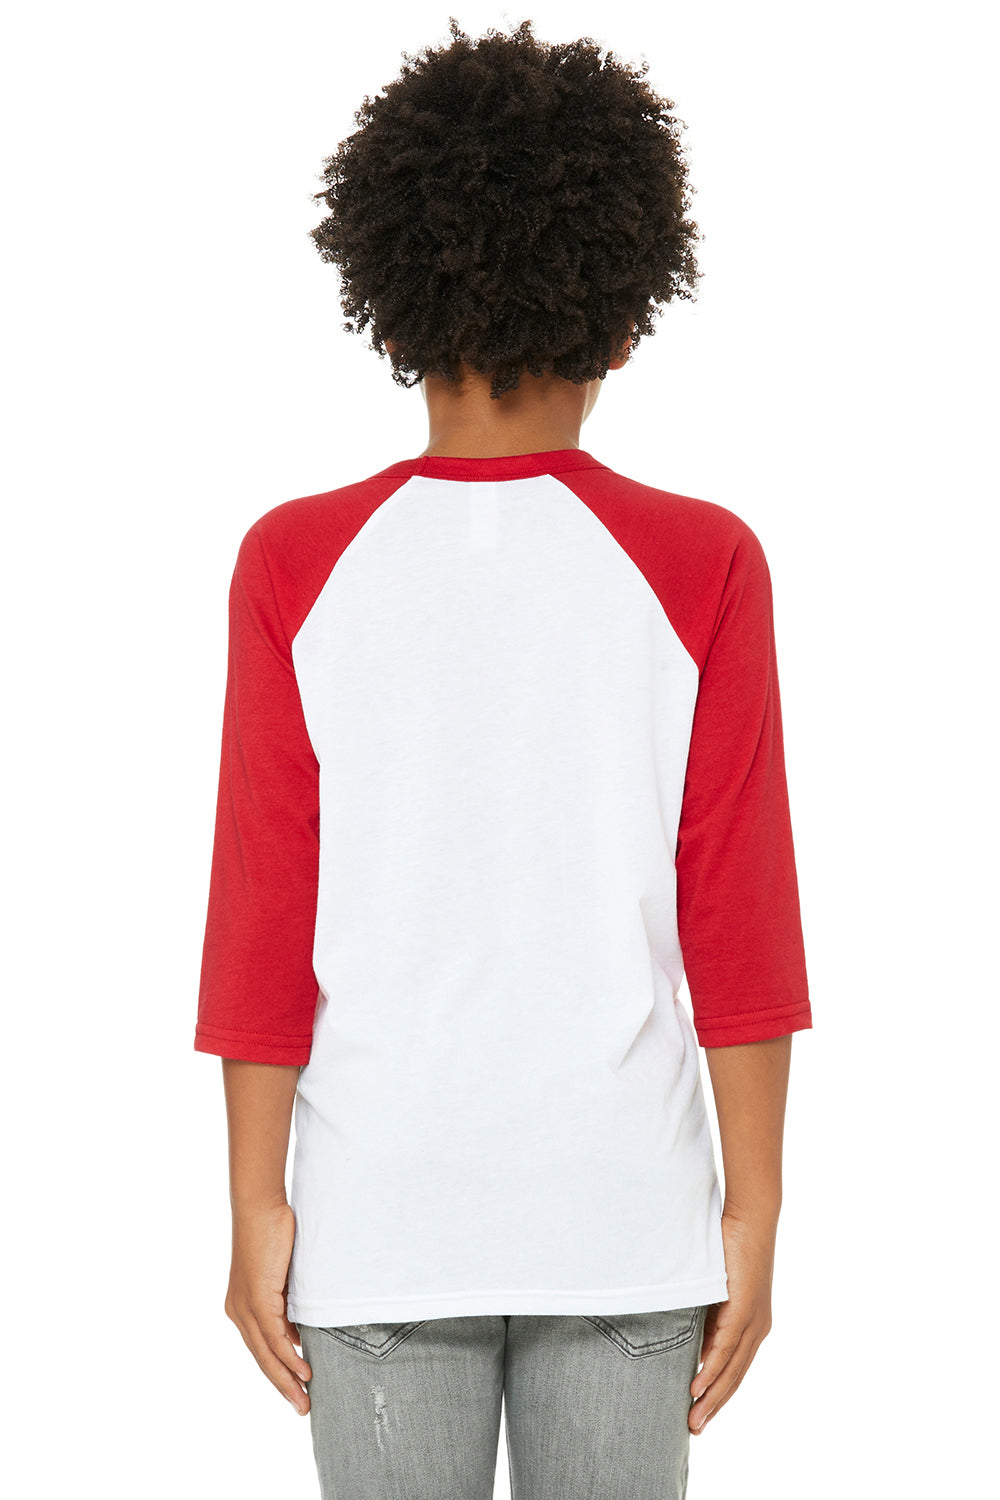 Bella + Canvas 3200Y Youth 3/4 Sleeve Crewneck T-Shirt White/Red Model Back